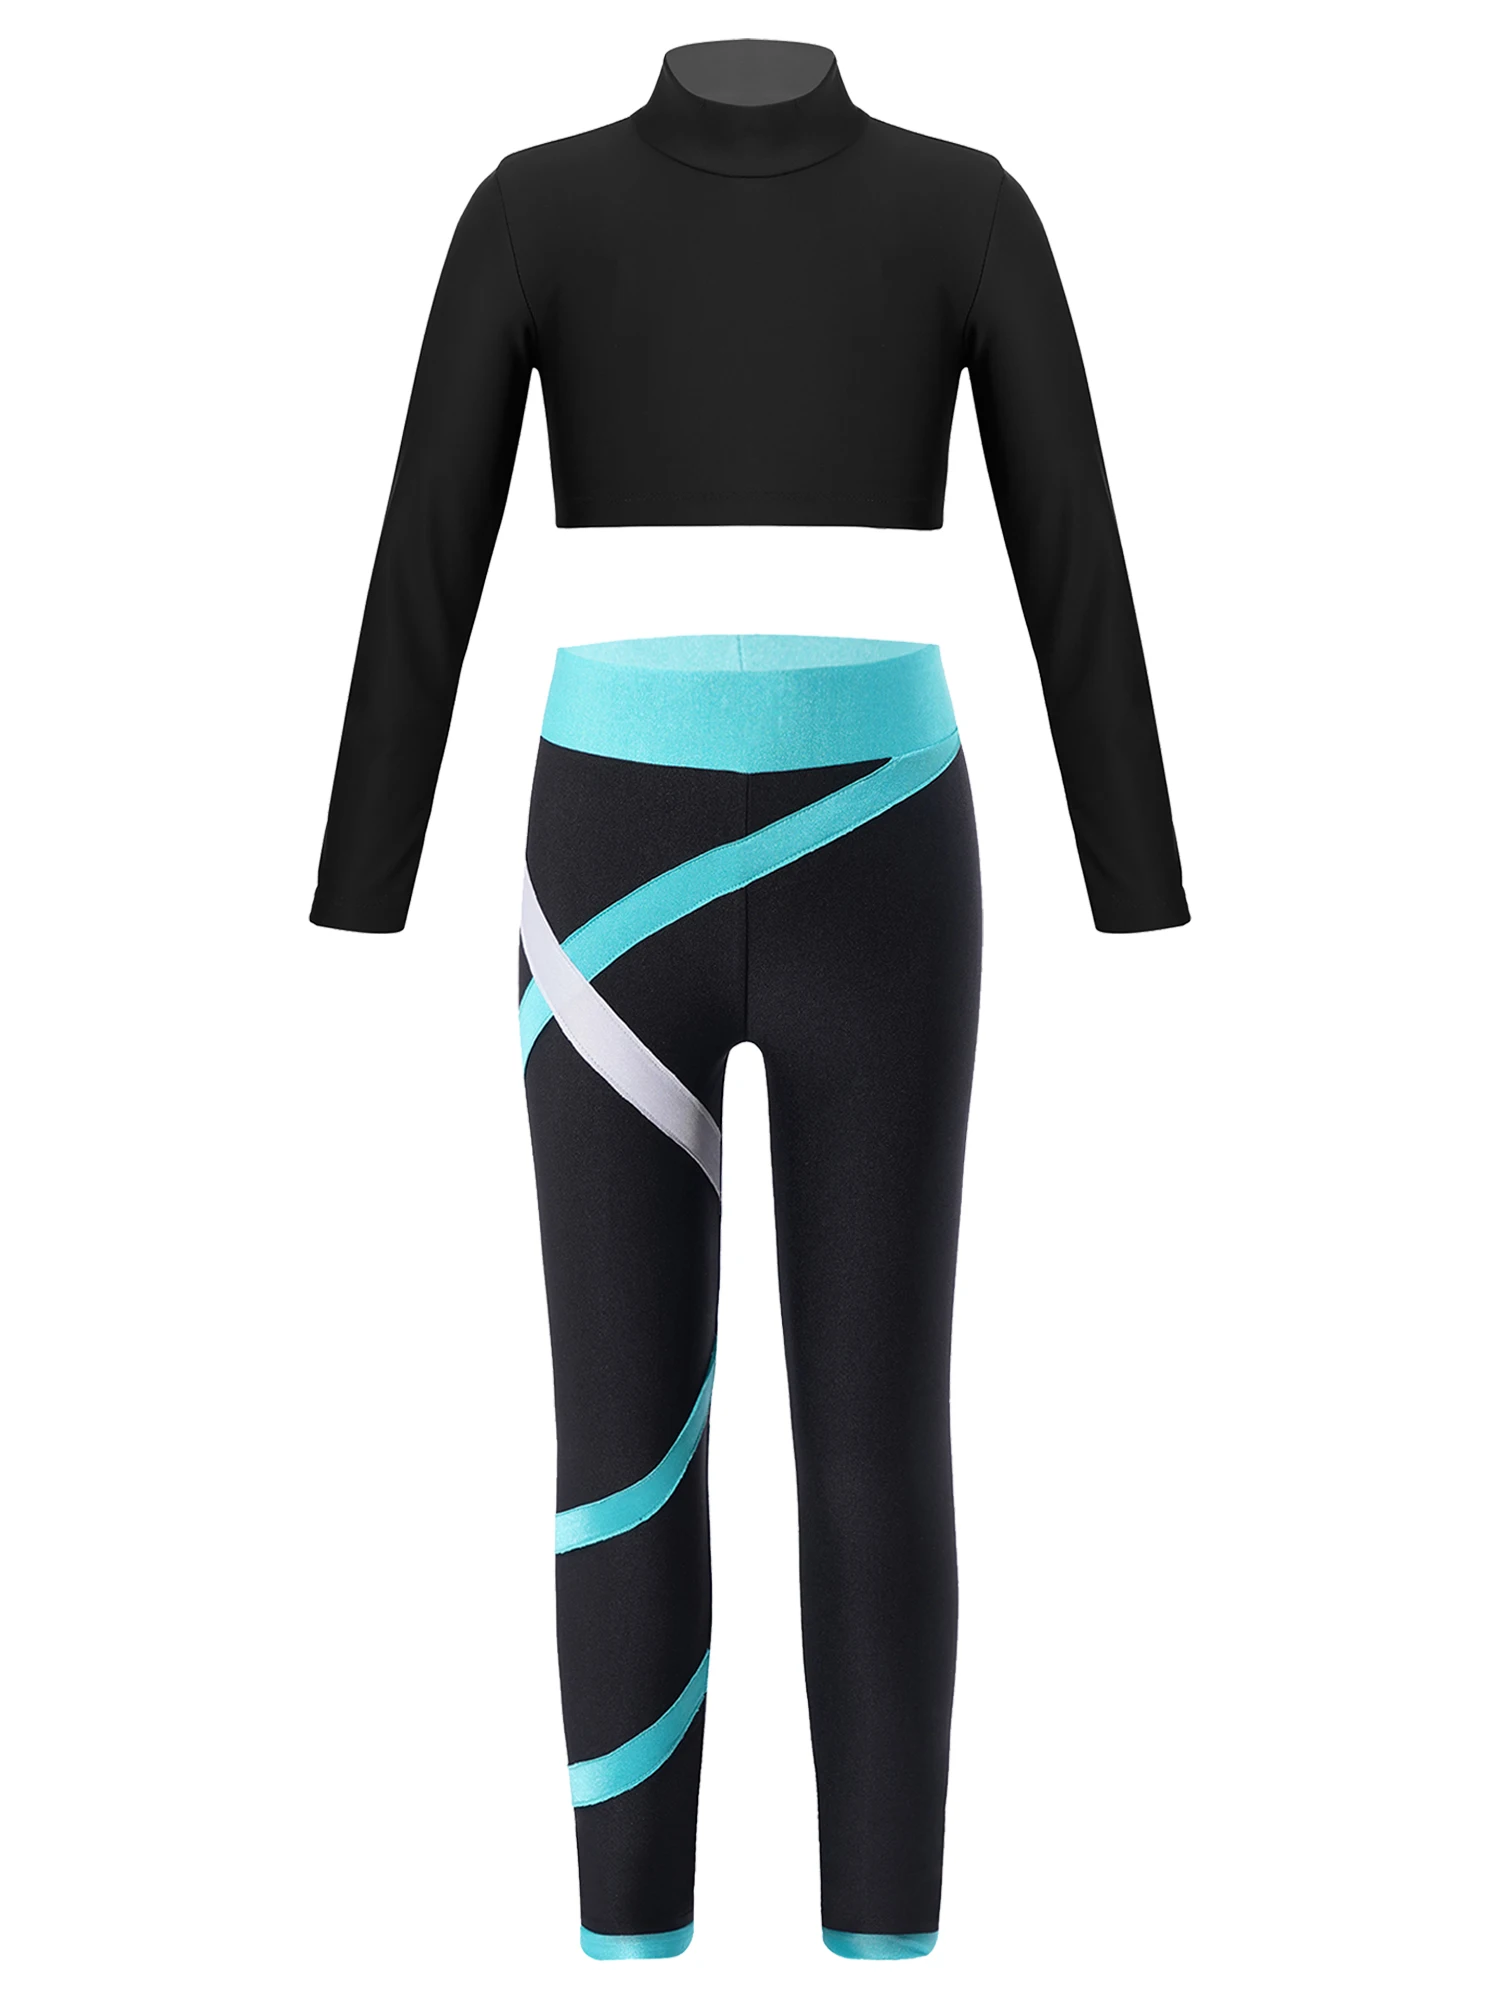 

Kids Girls Sport Suit Long Sleeves Crop Top with Colorblock Leggings for Skating Workout Sports Suit Autumn sportwear